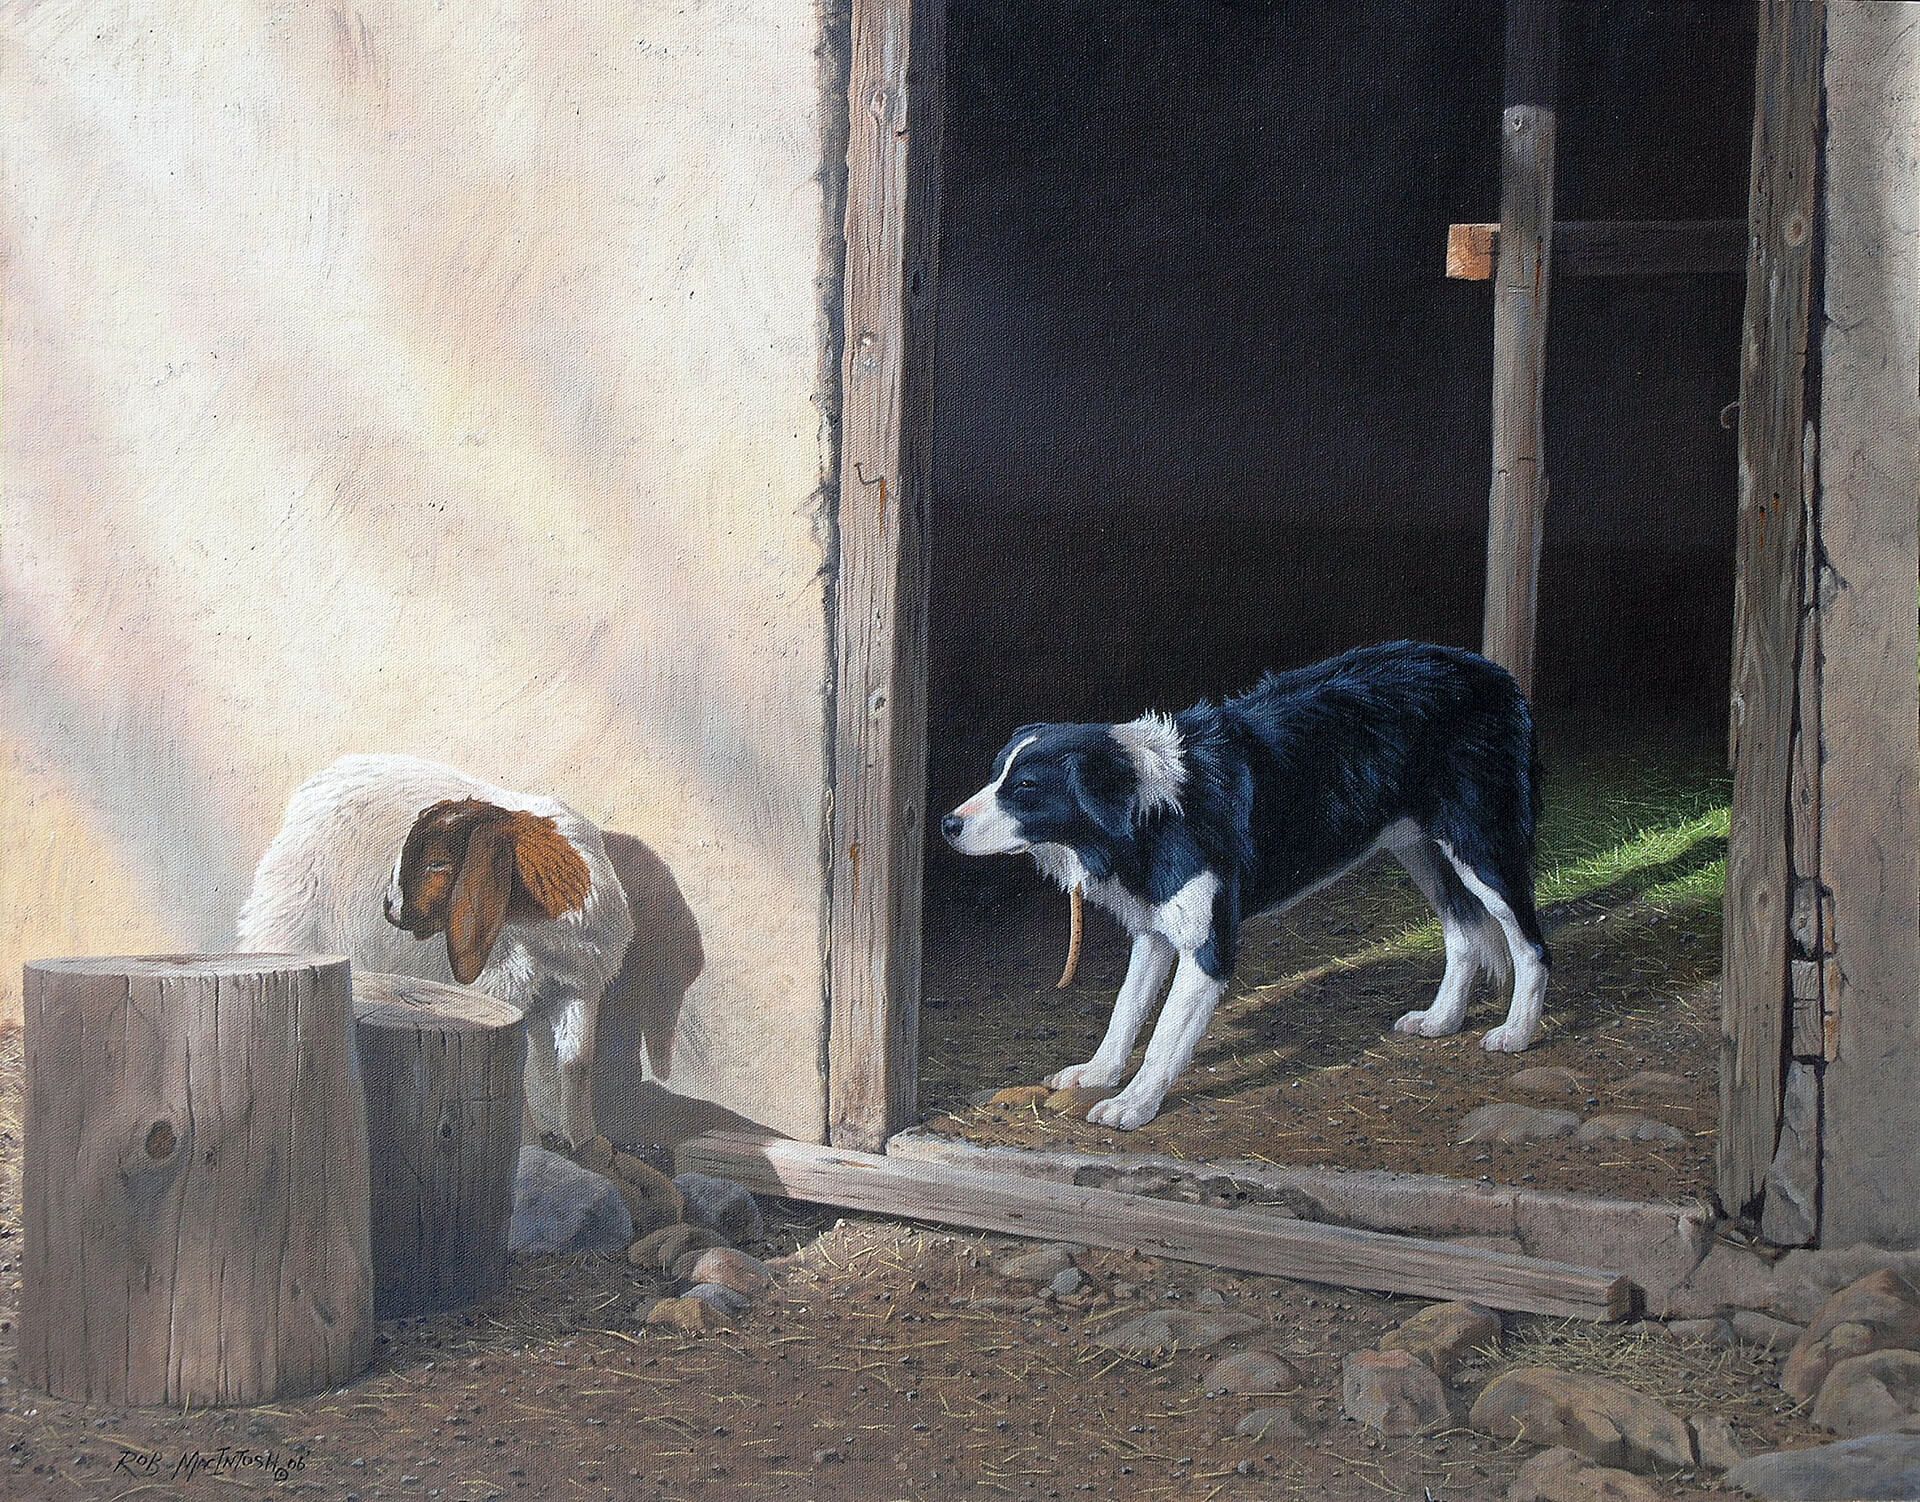 Photorealistic painting of a sheep dog looking out of a barn door at a goat